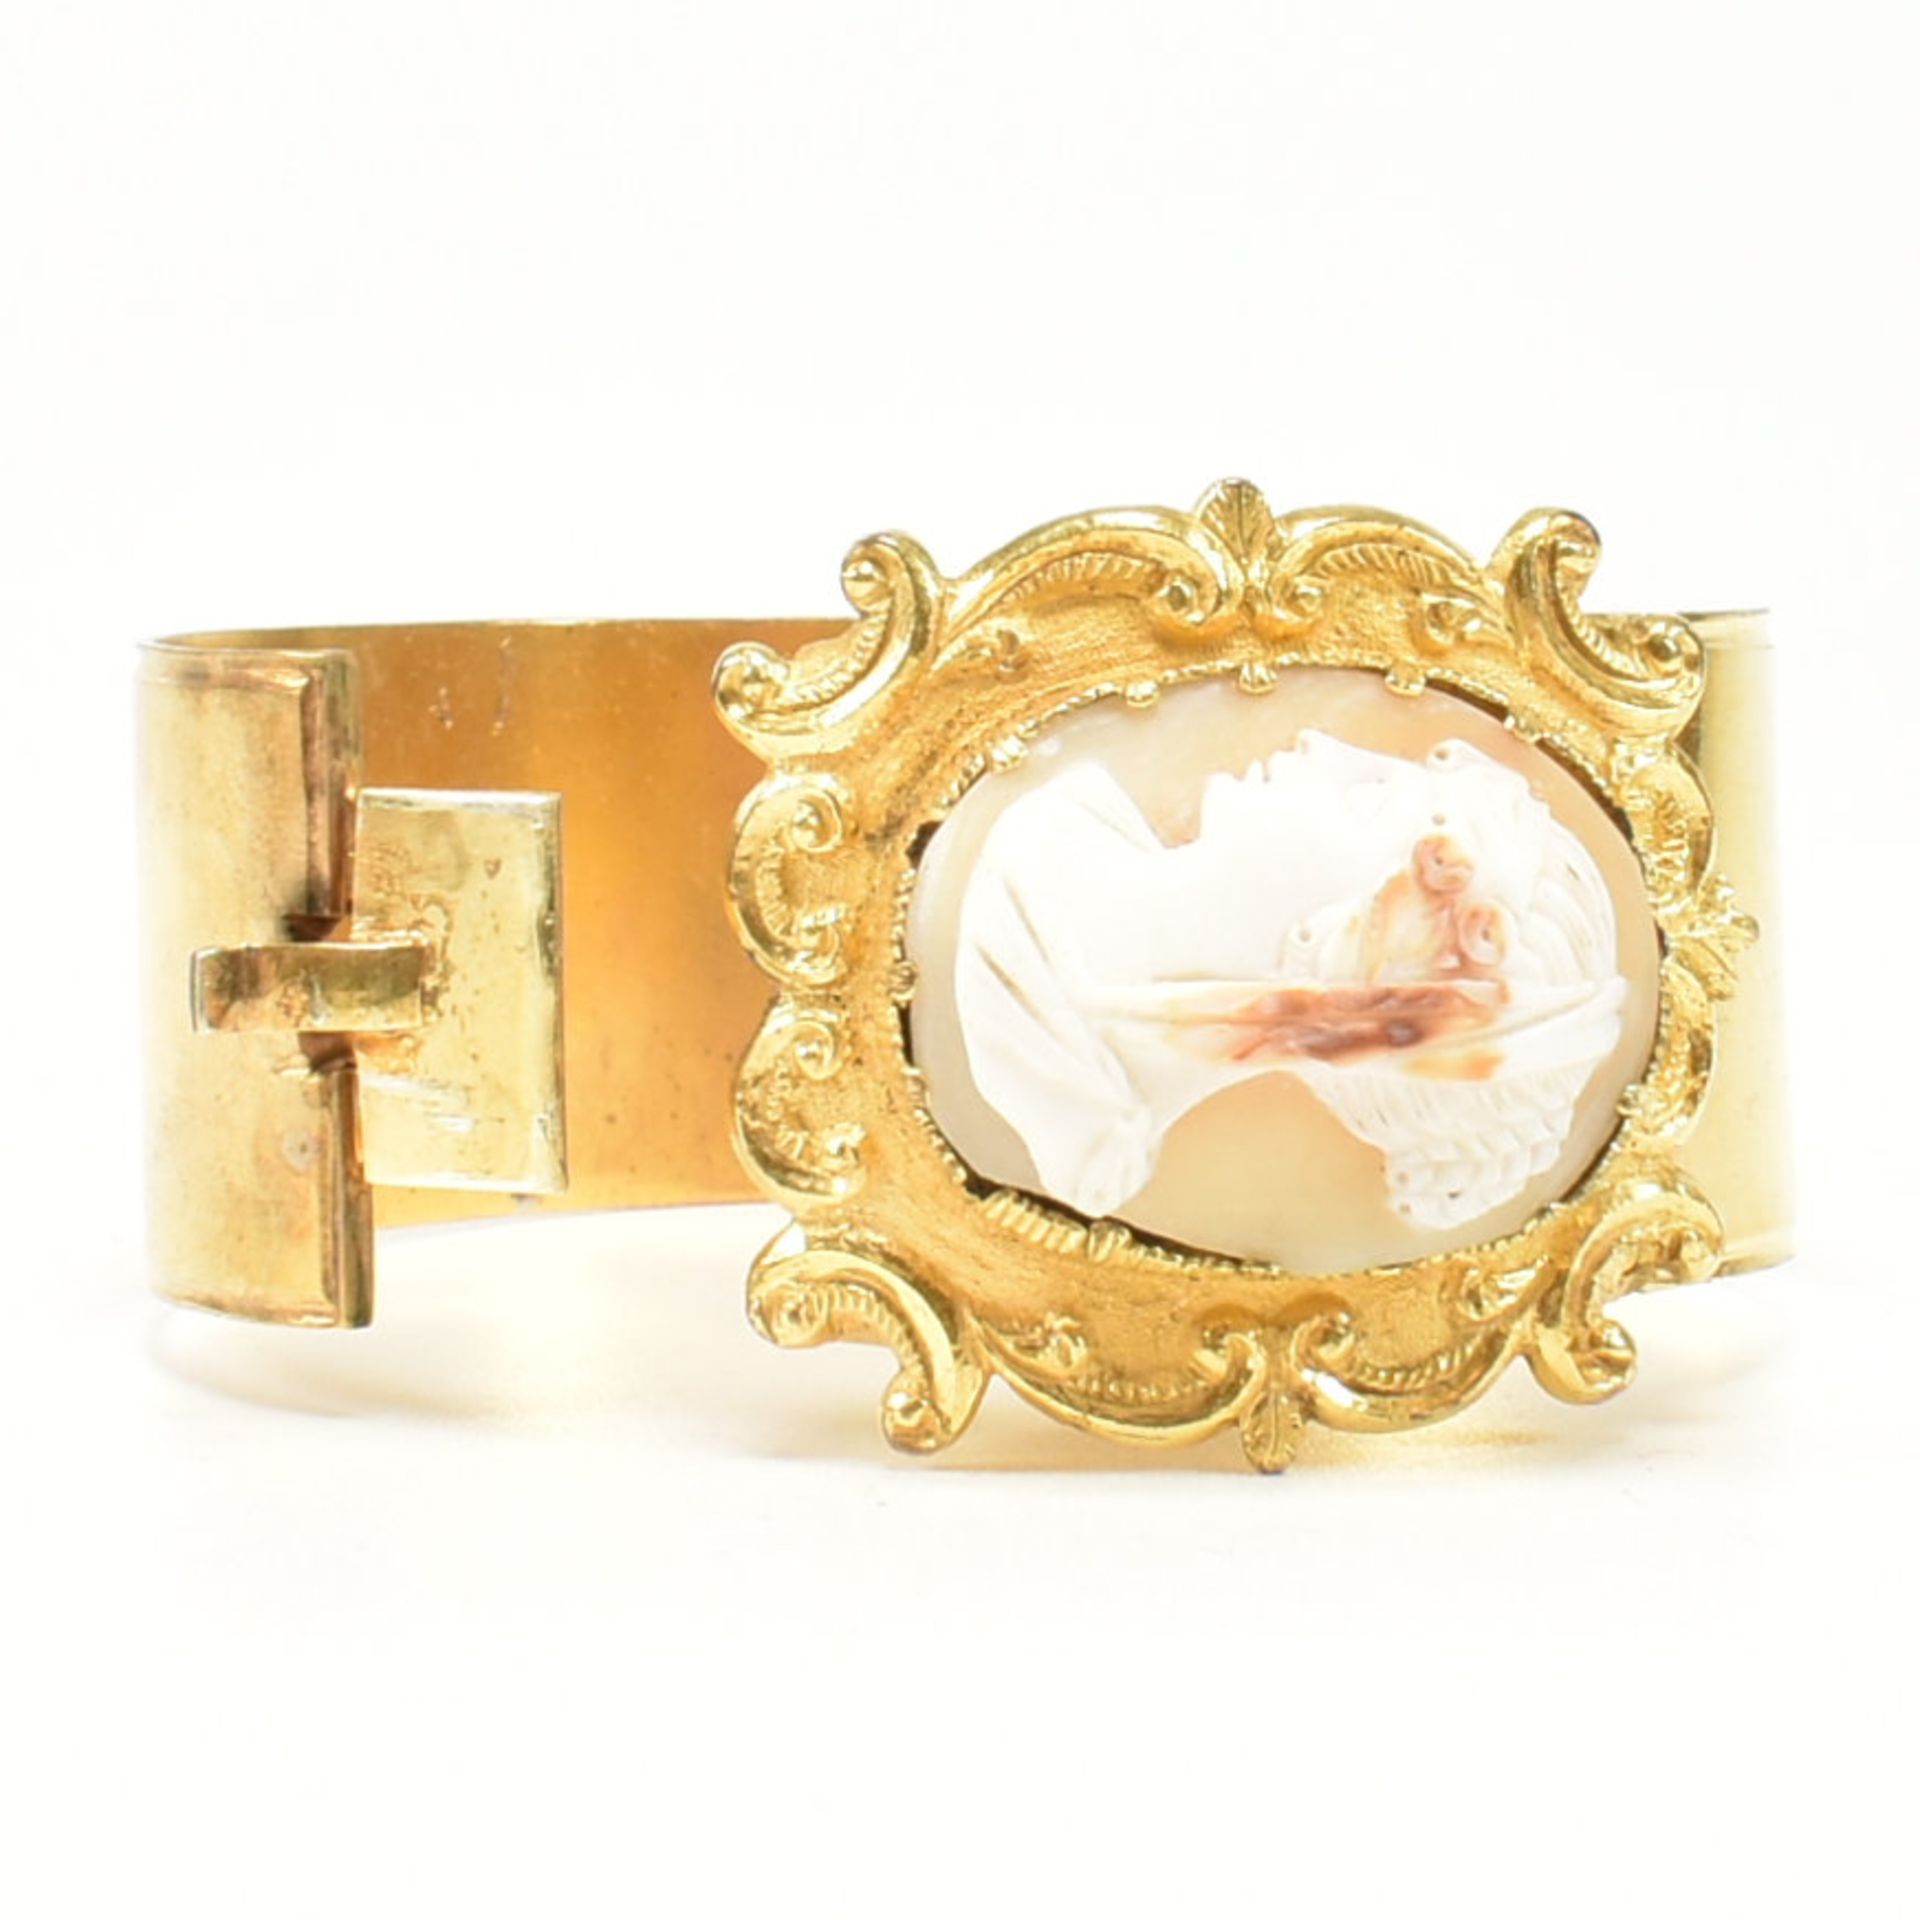 19TH CENTURY SILVER GILT SHELL CAMEO DOUBLE HINGED BANGLE - Image 9 of 11